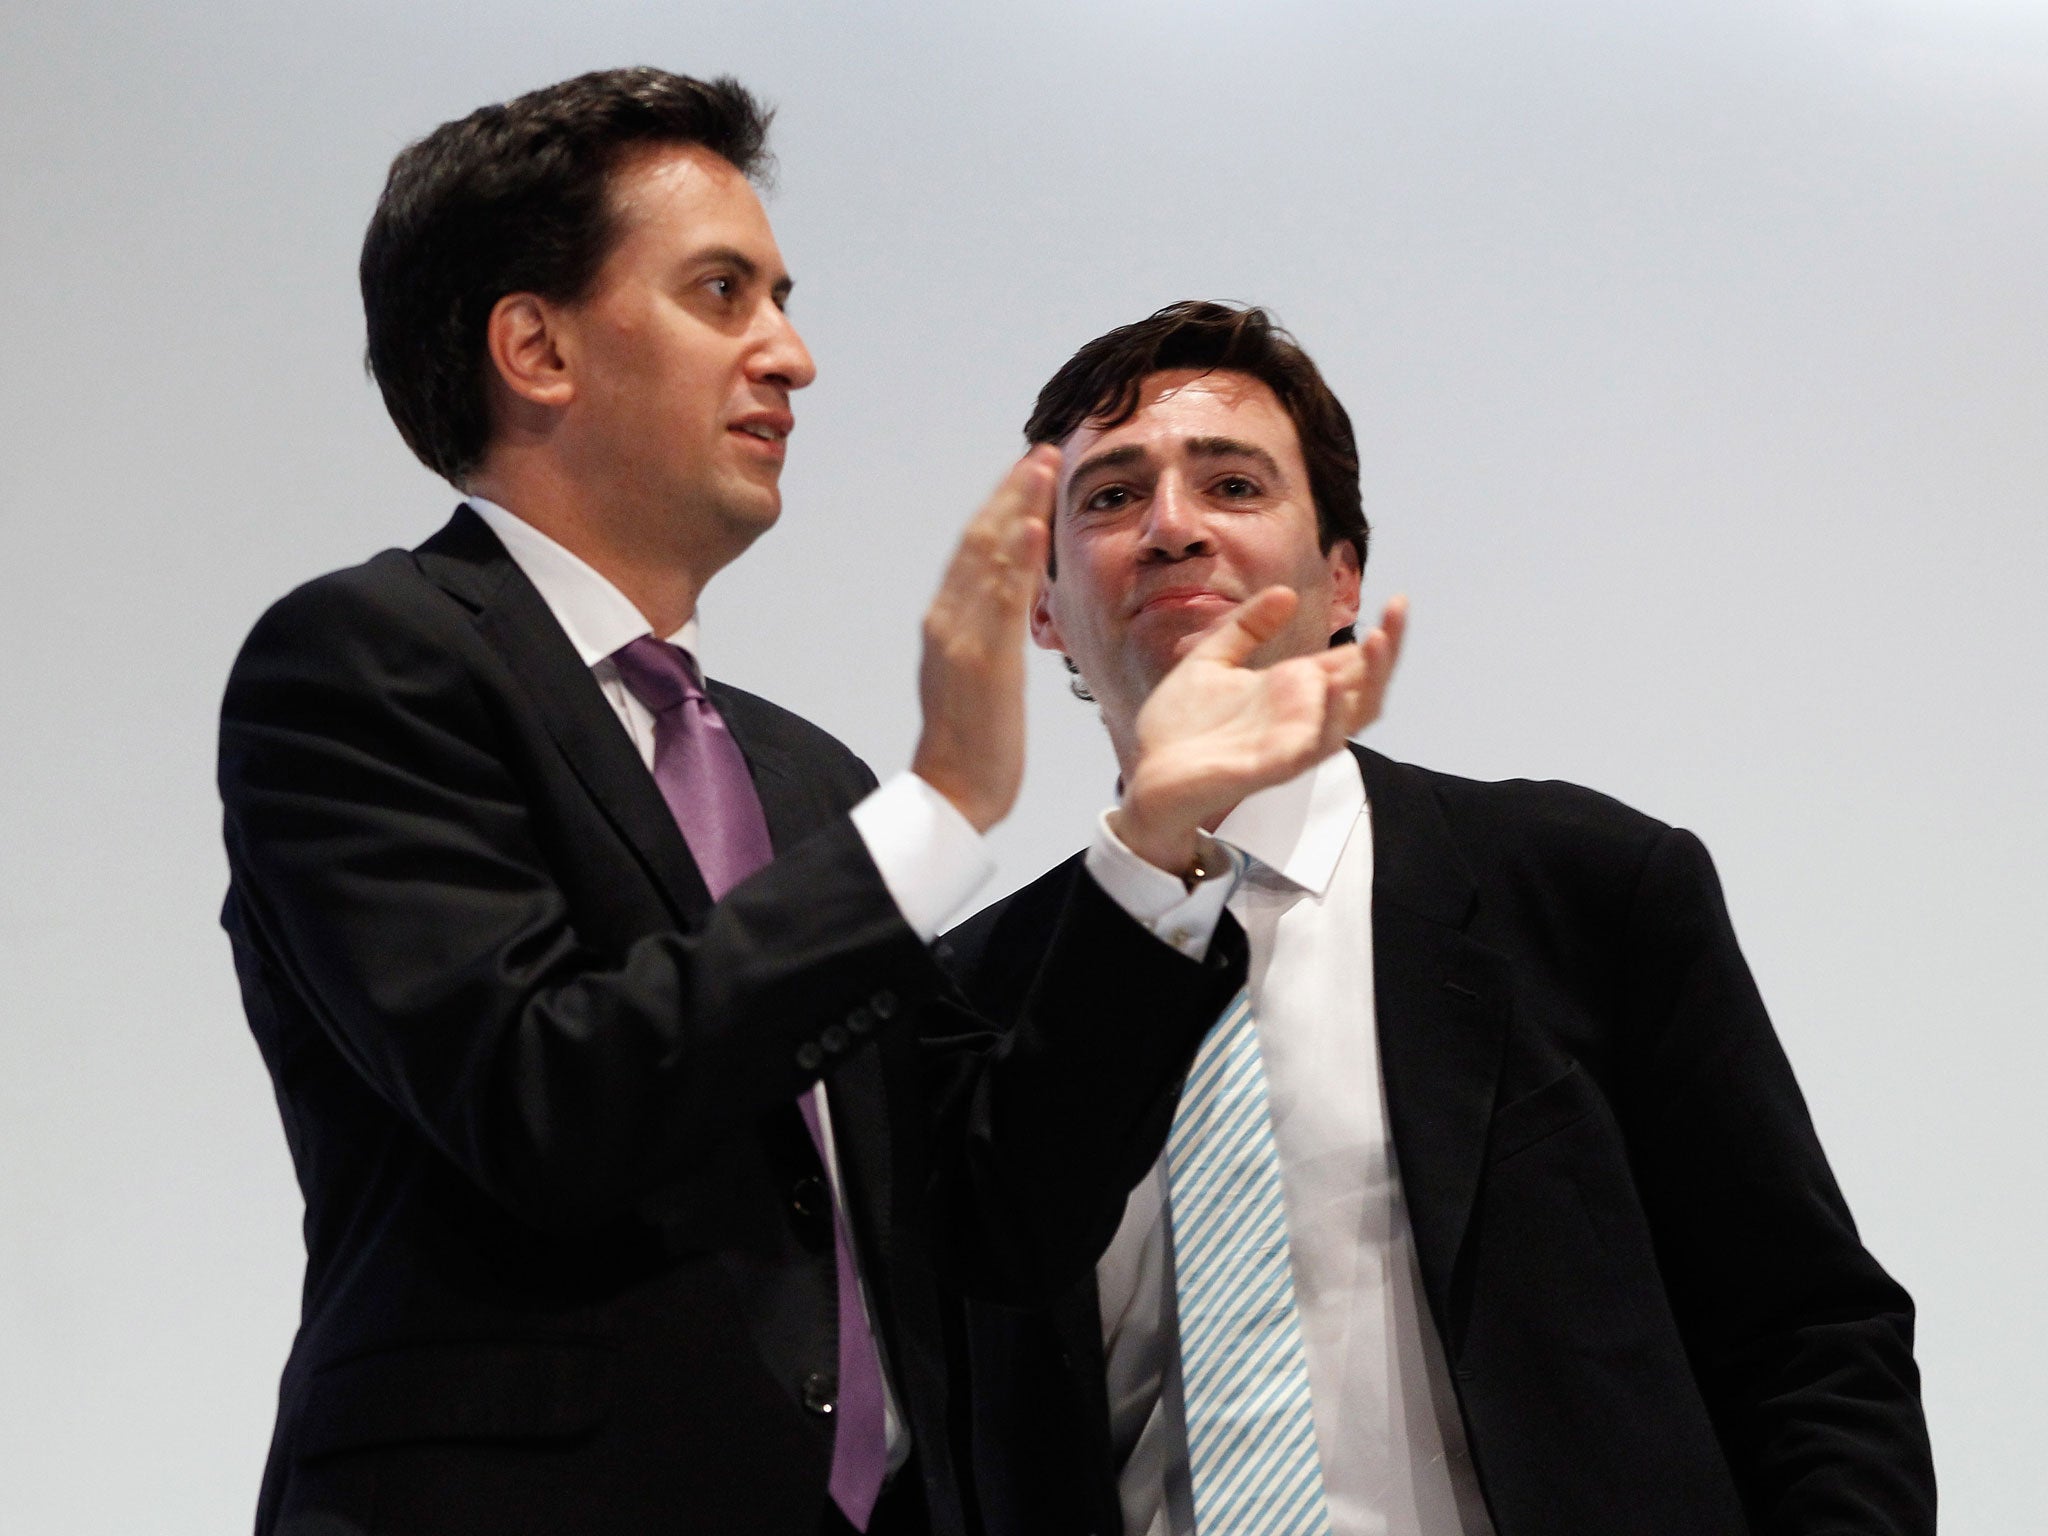 Andy Burnham says he is confident Miliband will be the next prime minister